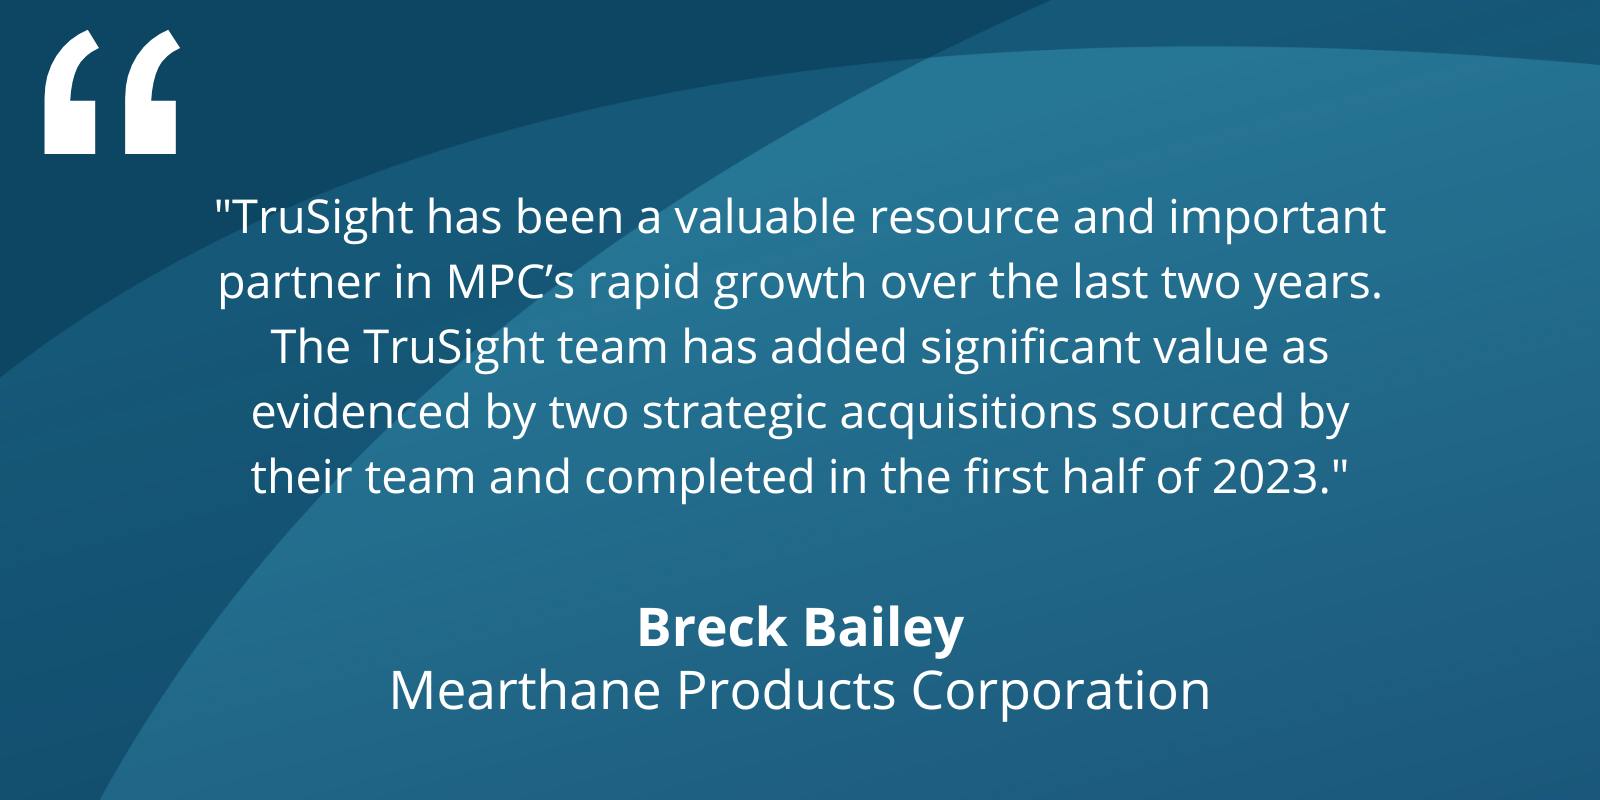 "TruSight has been a valuable resource and important partner in MPC's rapid growth over the last two years. The TruSight team has added significant value as evidenced by two strategic acquisitions sourced by their team and completed in the first half of 2023." - Breck Bailey, Merthane Products Corporation